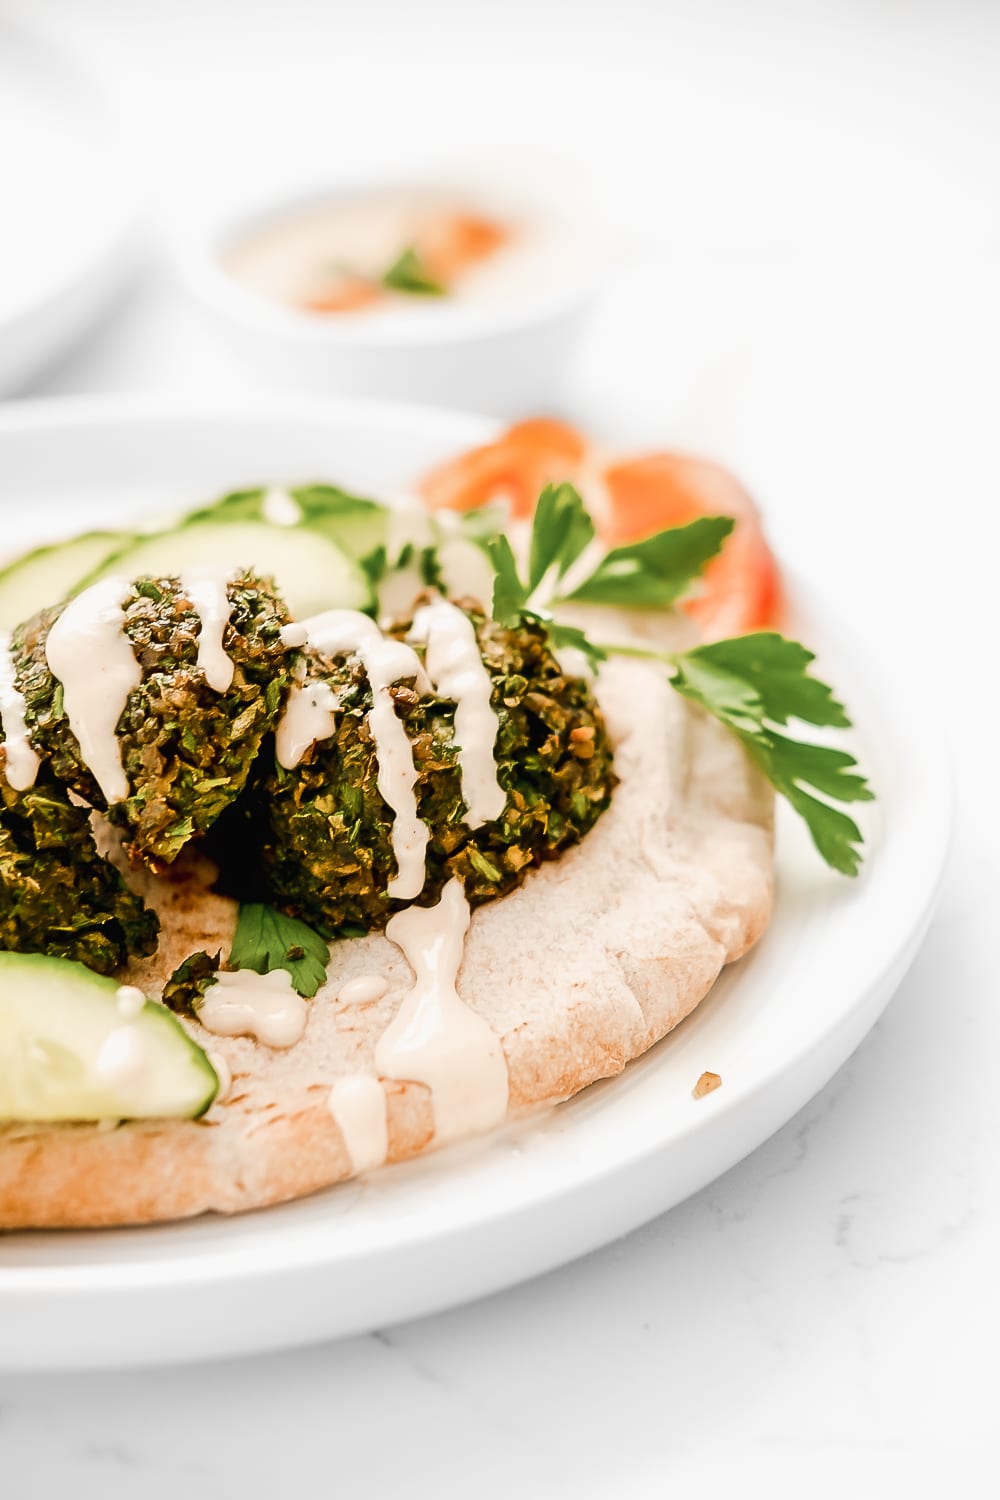 Baked falafel on pita drizzled with tahini sauce